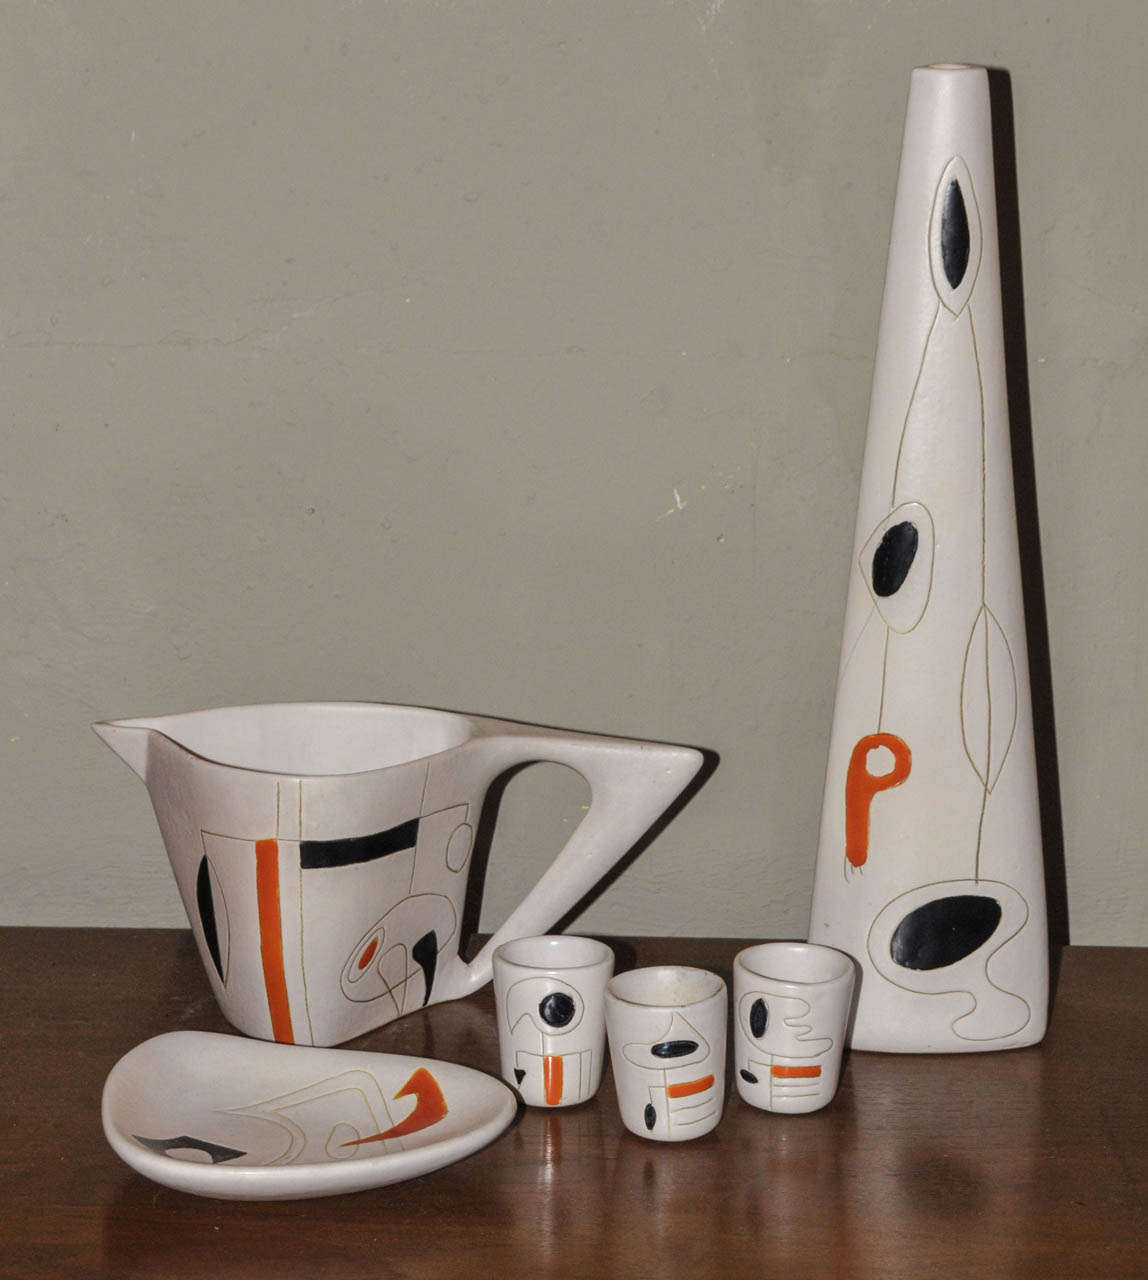 Set of Six 1950's Ceramic Pieces by Peter and Denise Orlando. Good condition. Normal wear consistent with age and use. 

Dimension (highest object) : Height 39cm x Length 10cm x Diameter 8cm.
Dimension (coffee pot): Height 25cm x Length 12cm x